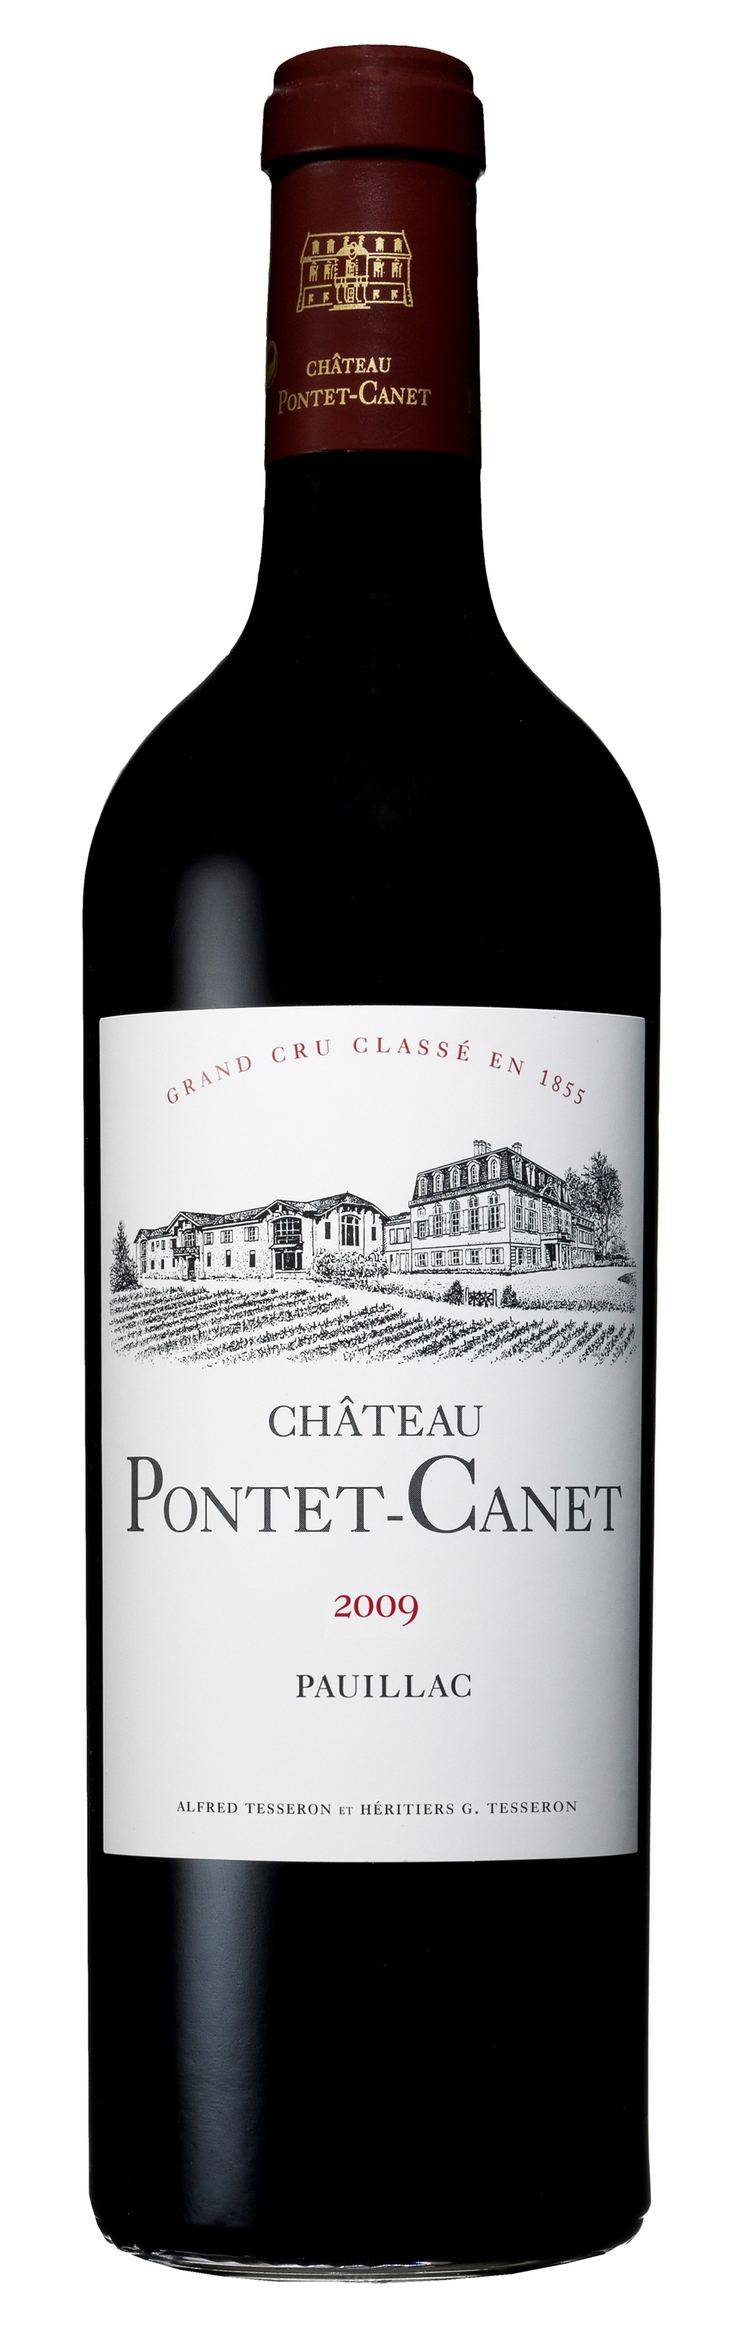 Château Pontet-Canet wwwomusecomhkimagesproductpaupont2008752